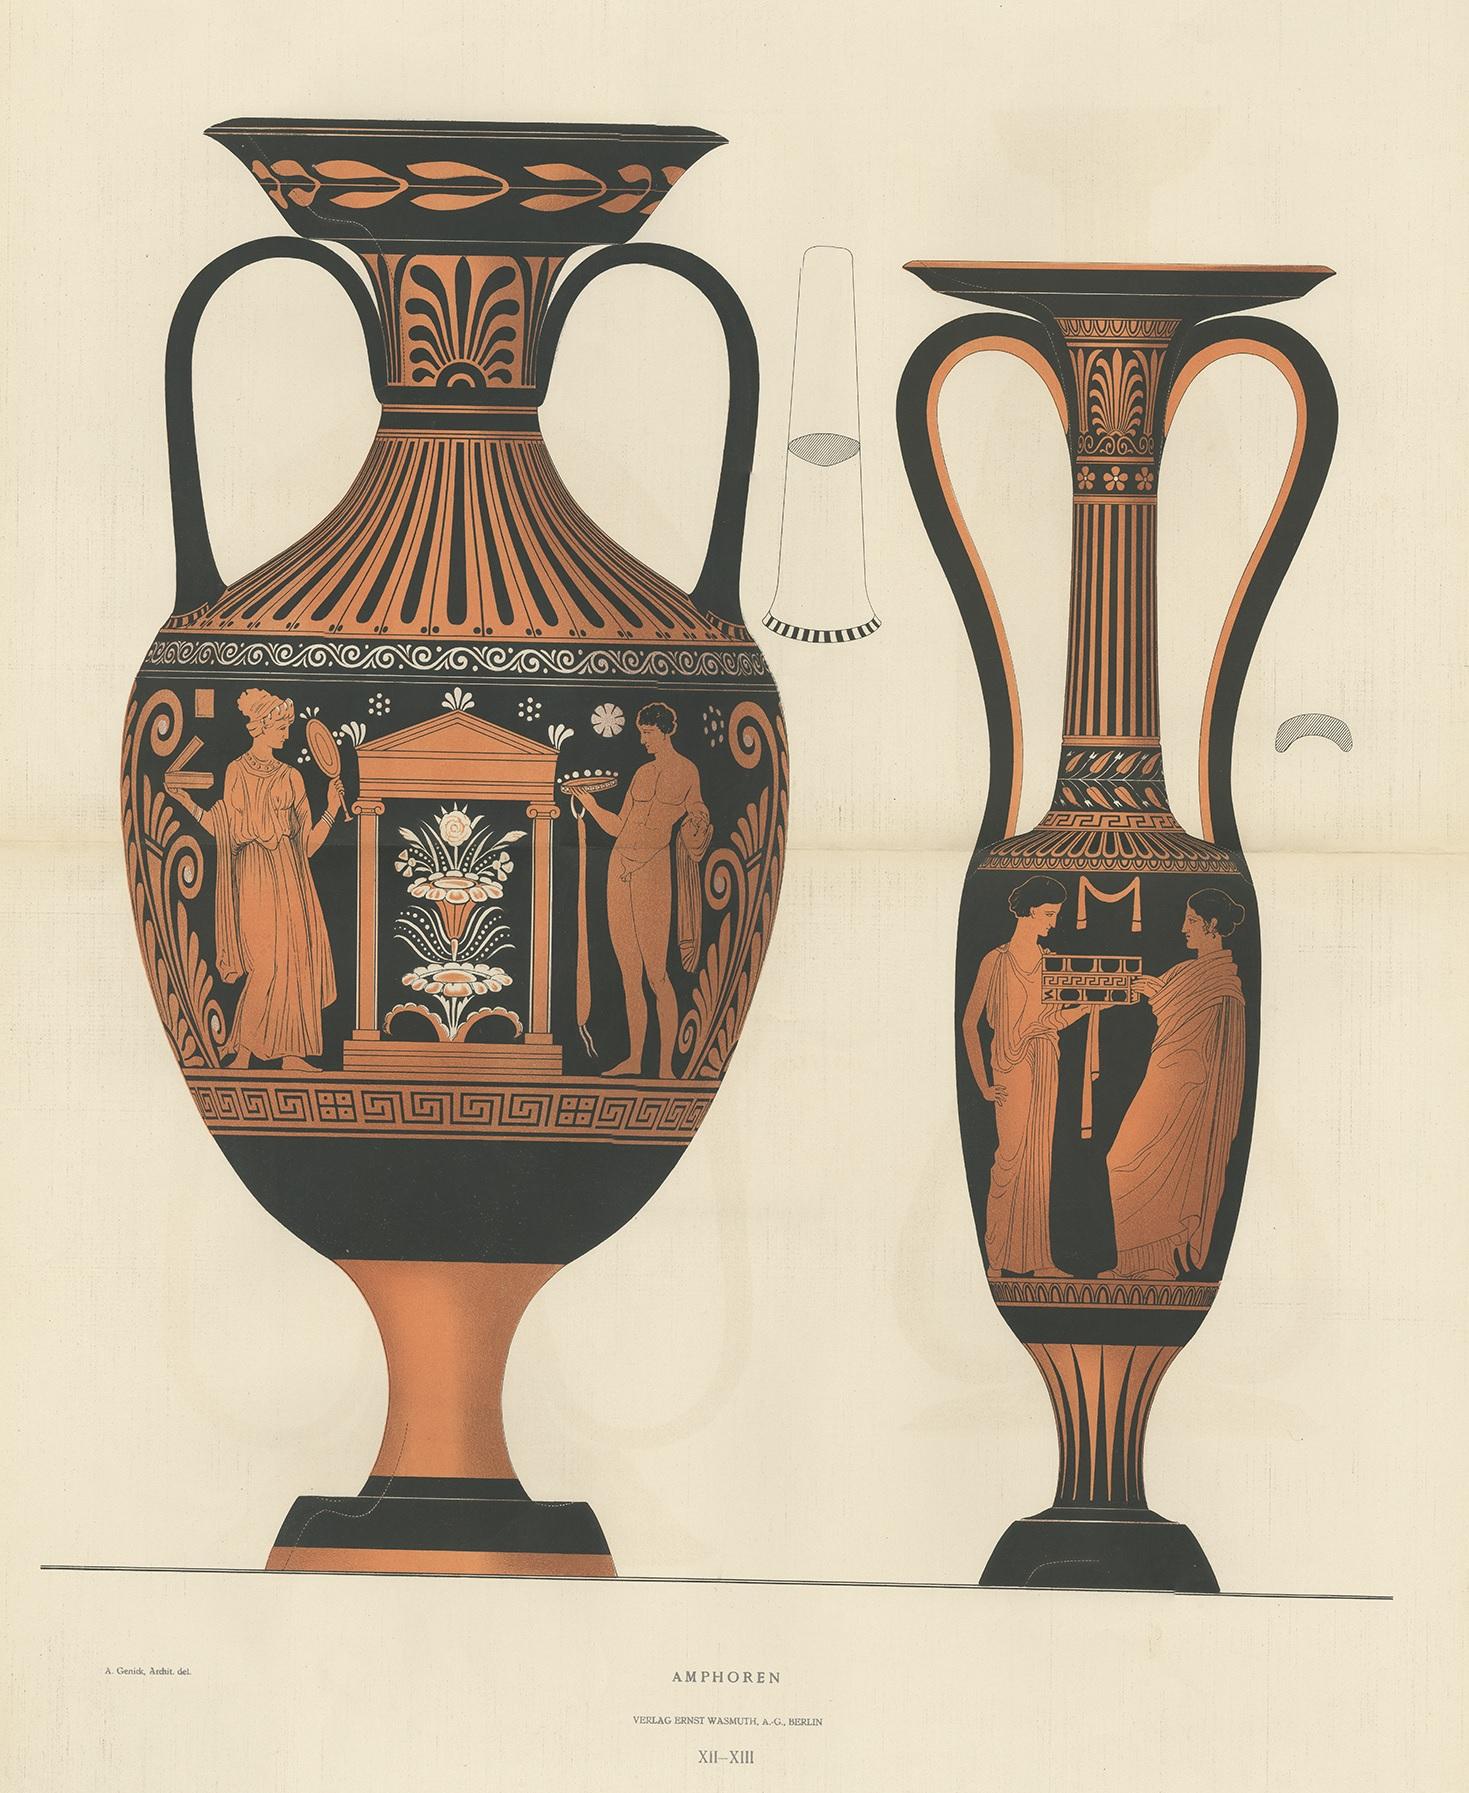 Antique print titled 'Amphoren'. Color-printed large lithograph by Ernst Wasmuth depicting Greek amphorae. This print originates from 'Griechische Keramik' by A. Genick. Albert Genick, an architect by training, was one of the leading German scholars